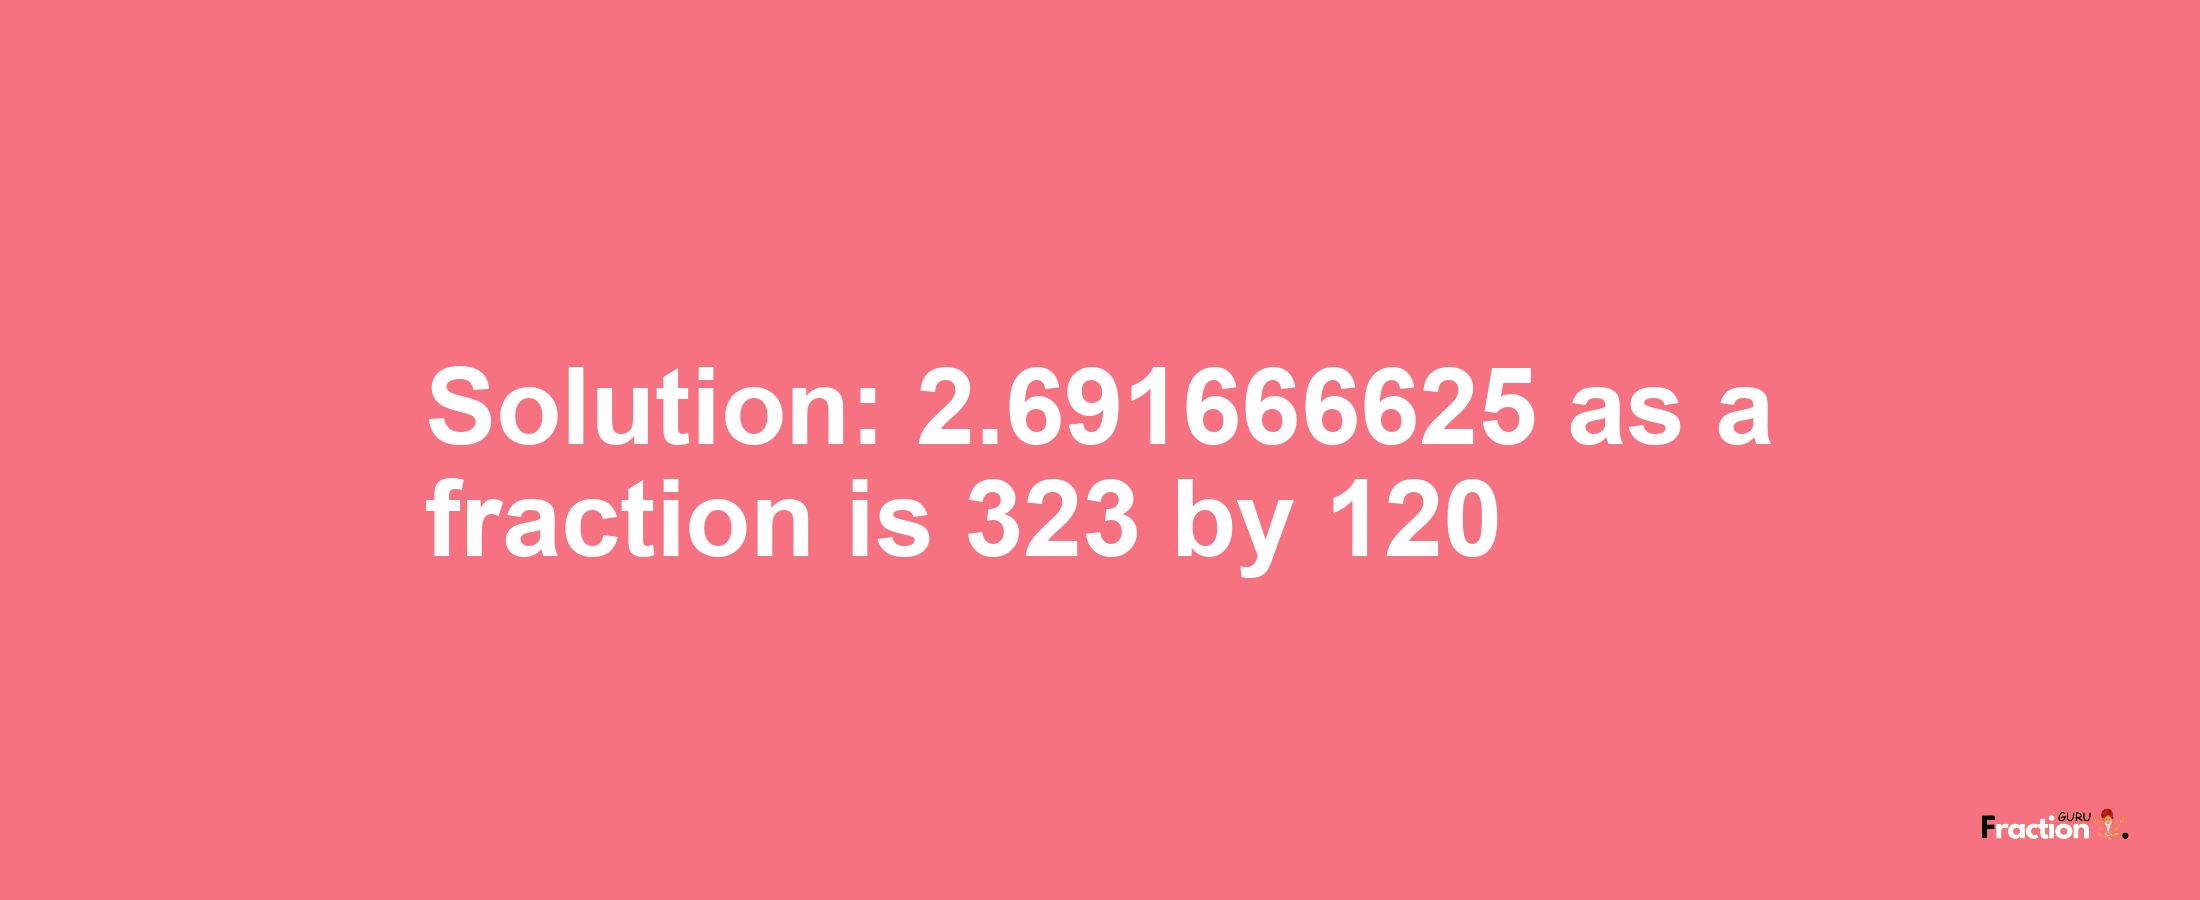 Solution:2.691666625 as a fraction is 323/120